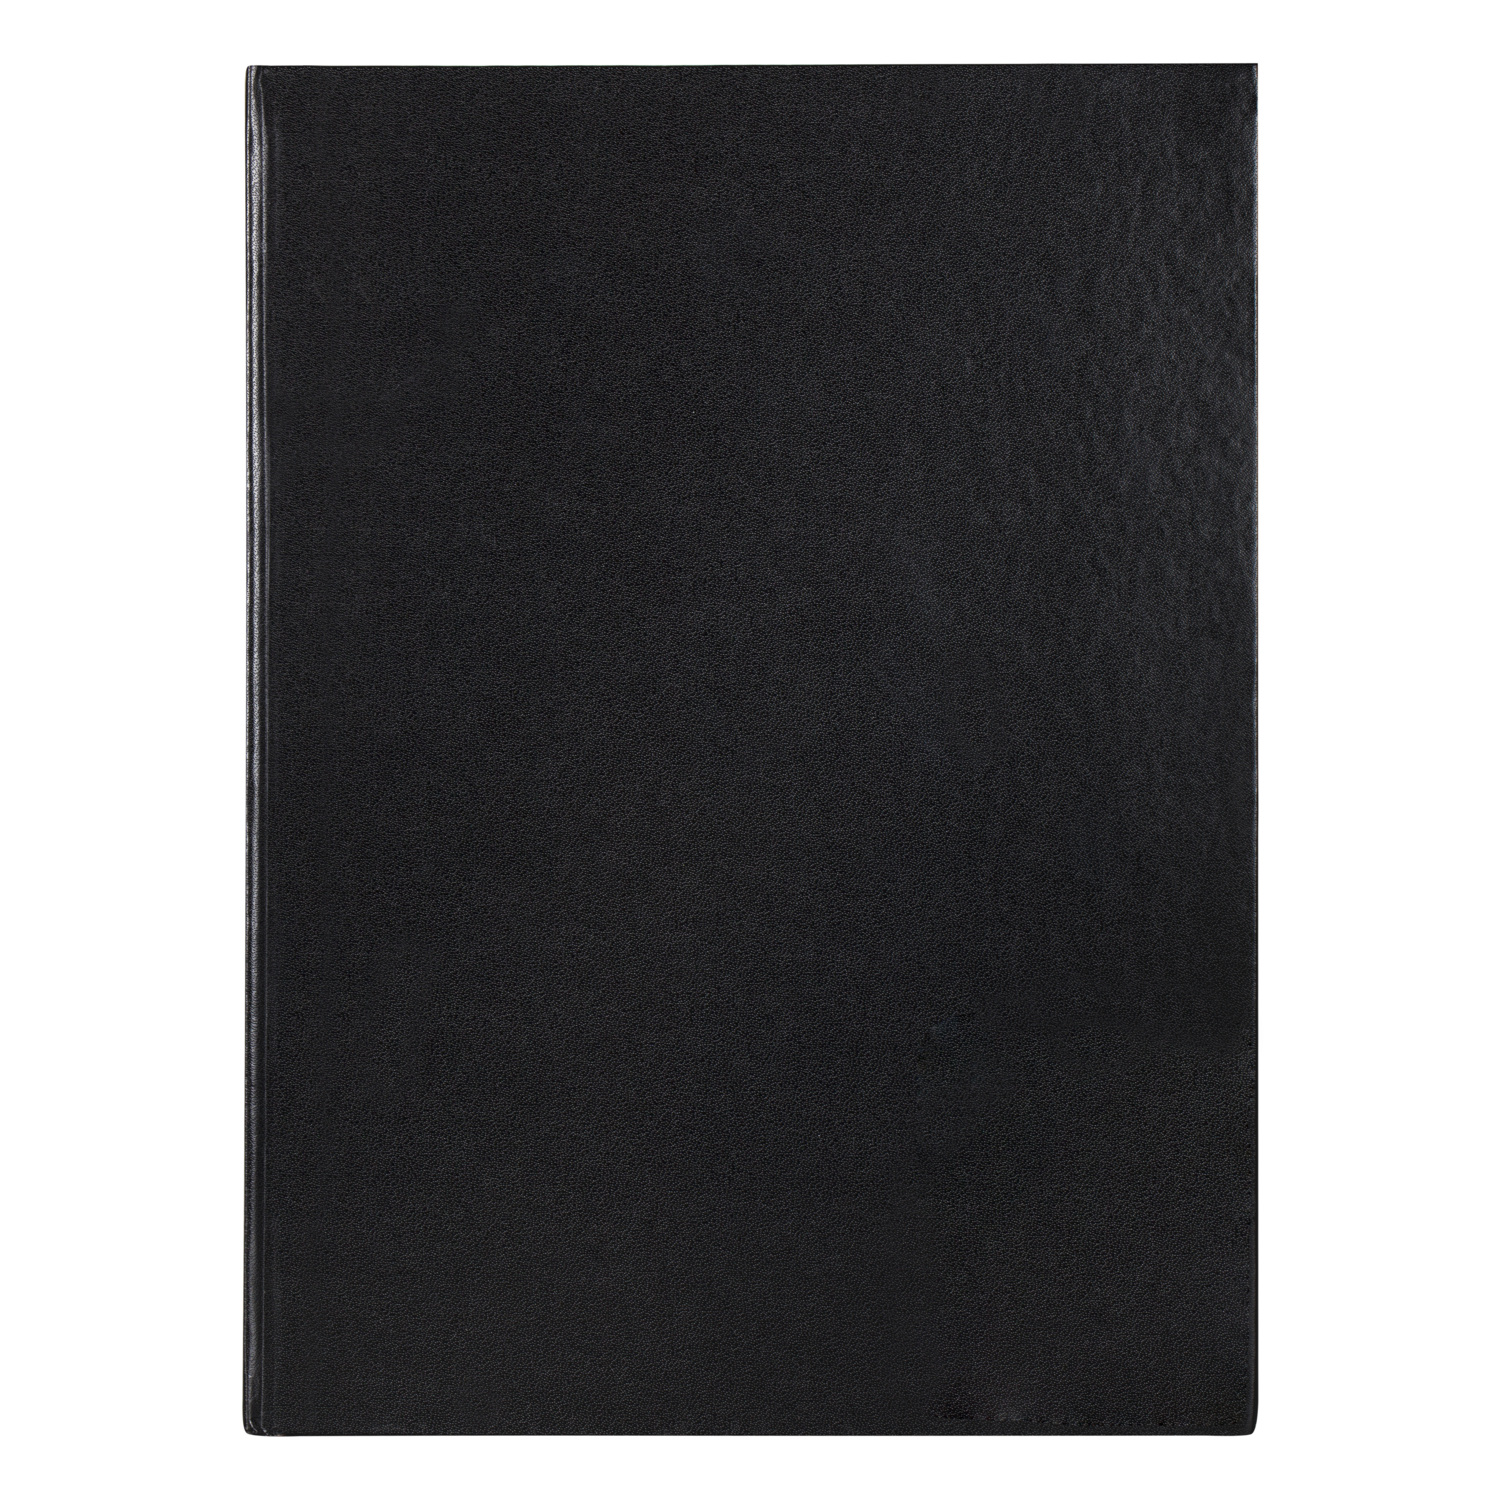 Winsor and Newton Hard Back Sketch Book - Black / A5 Image 1